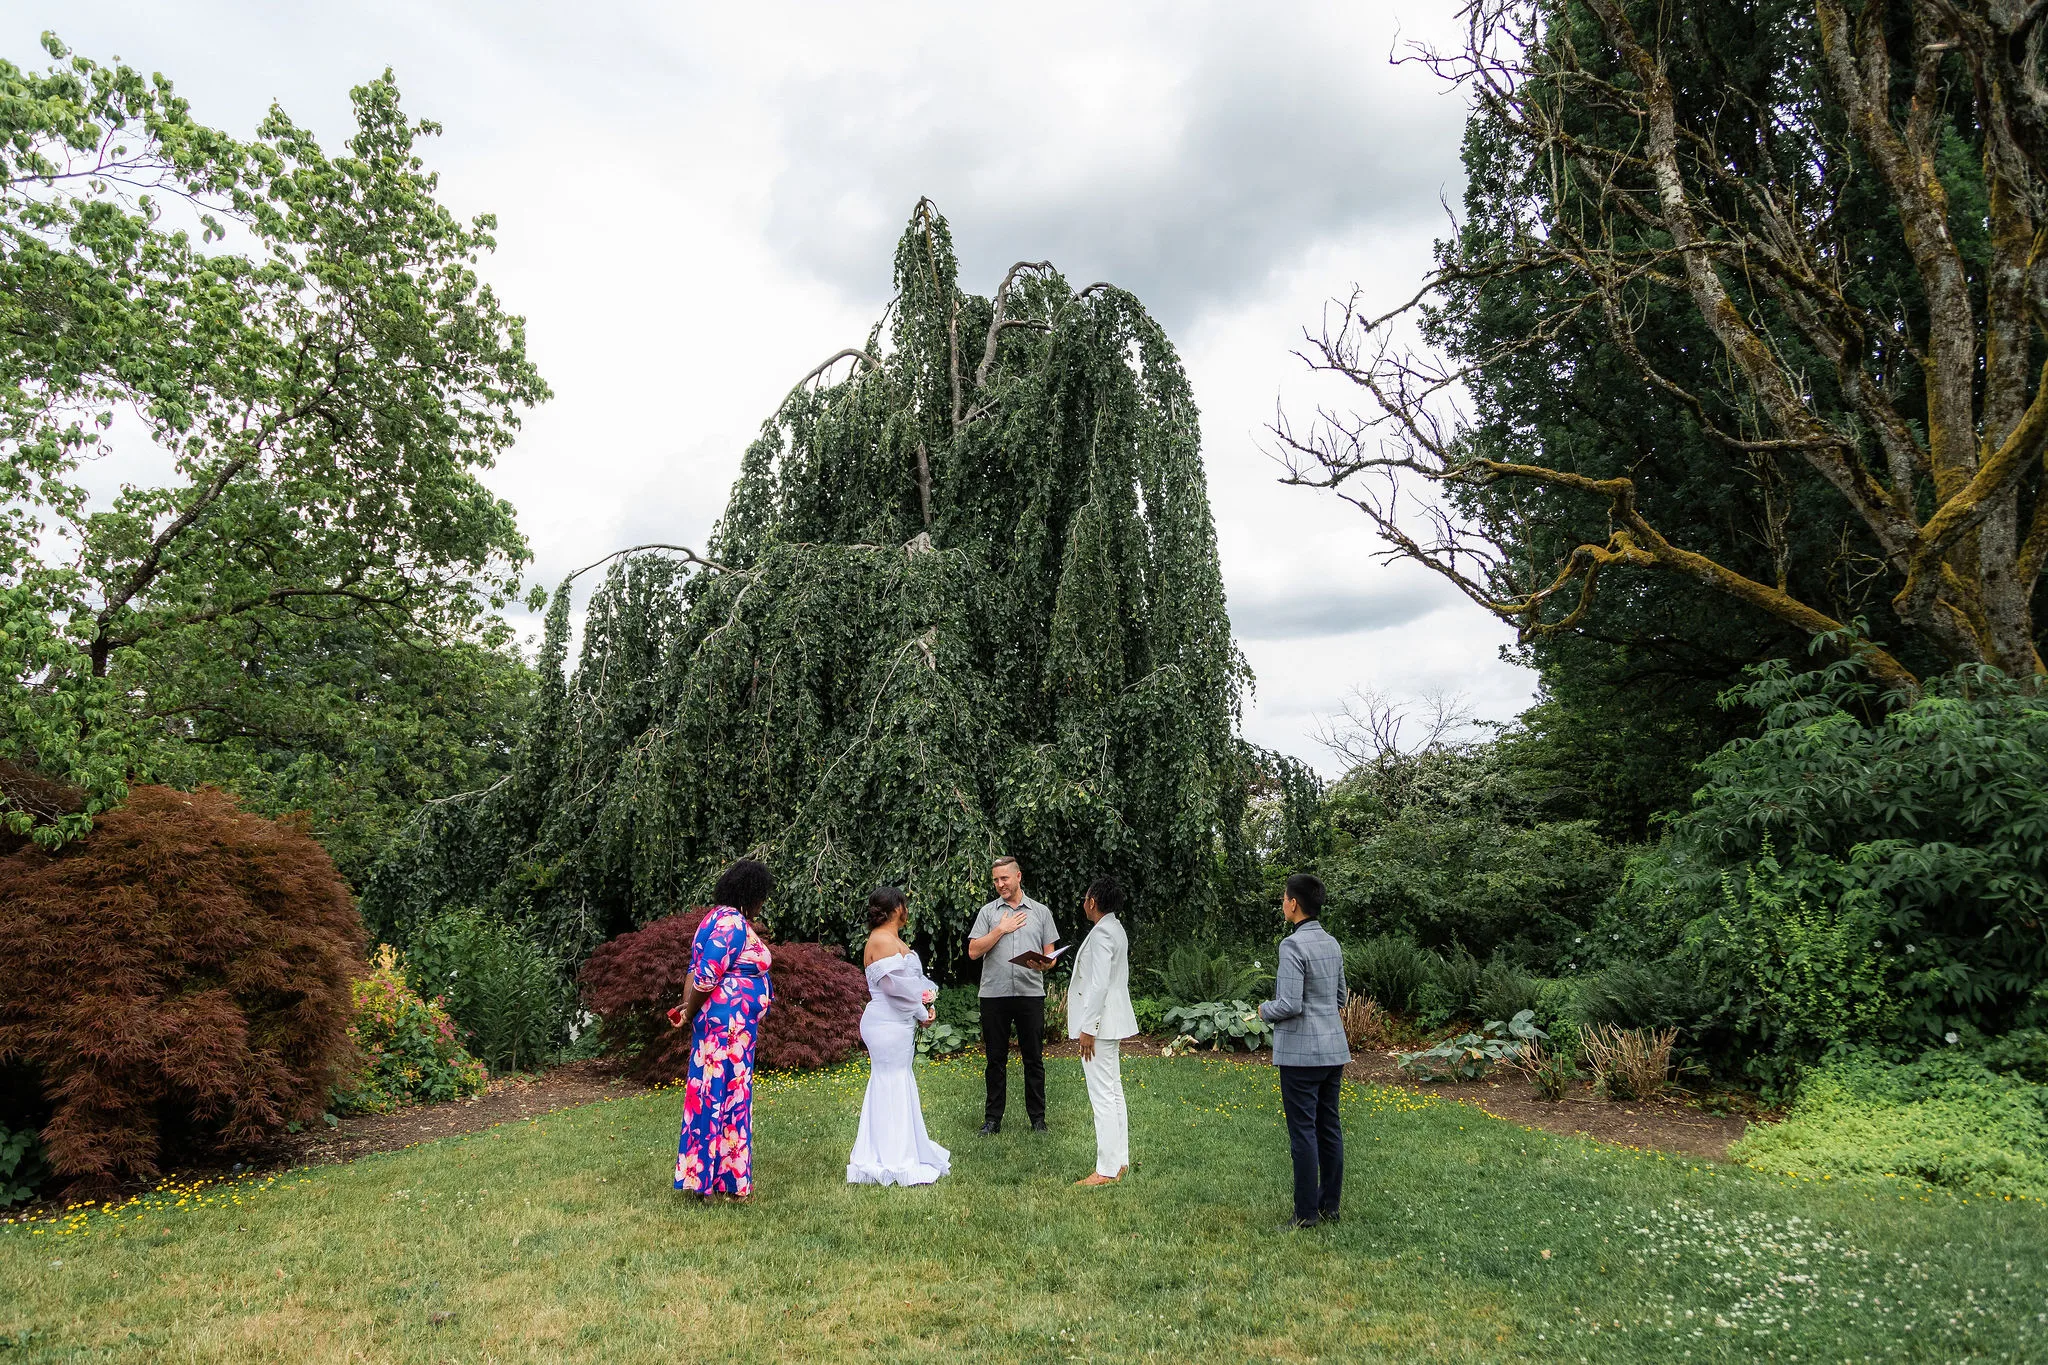 Officiant Wade leading an elopement ceremony in a Vancouver park